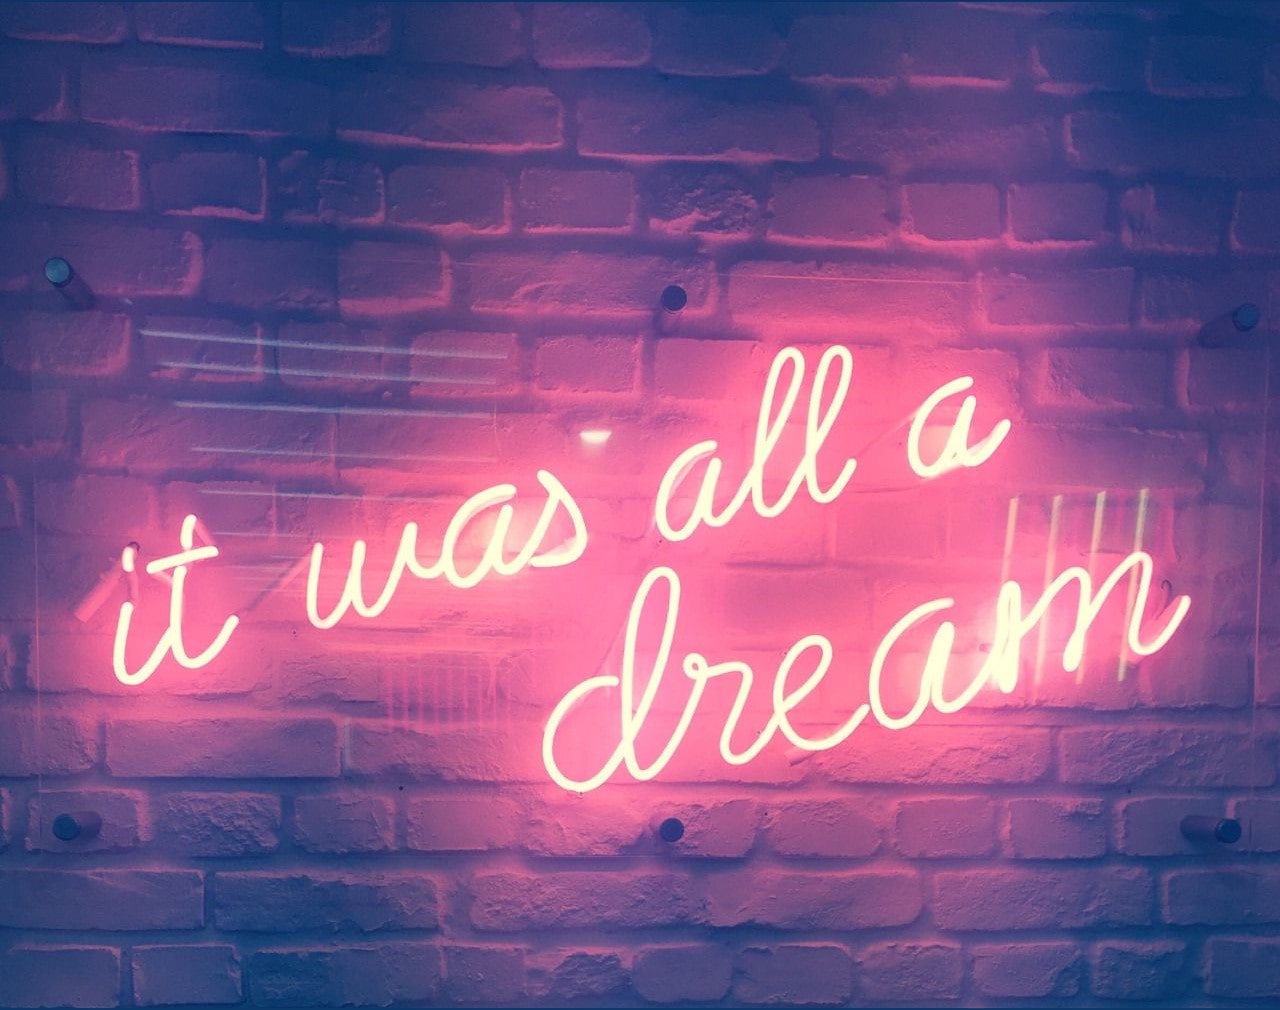 It Was All A Dream Wallpapers